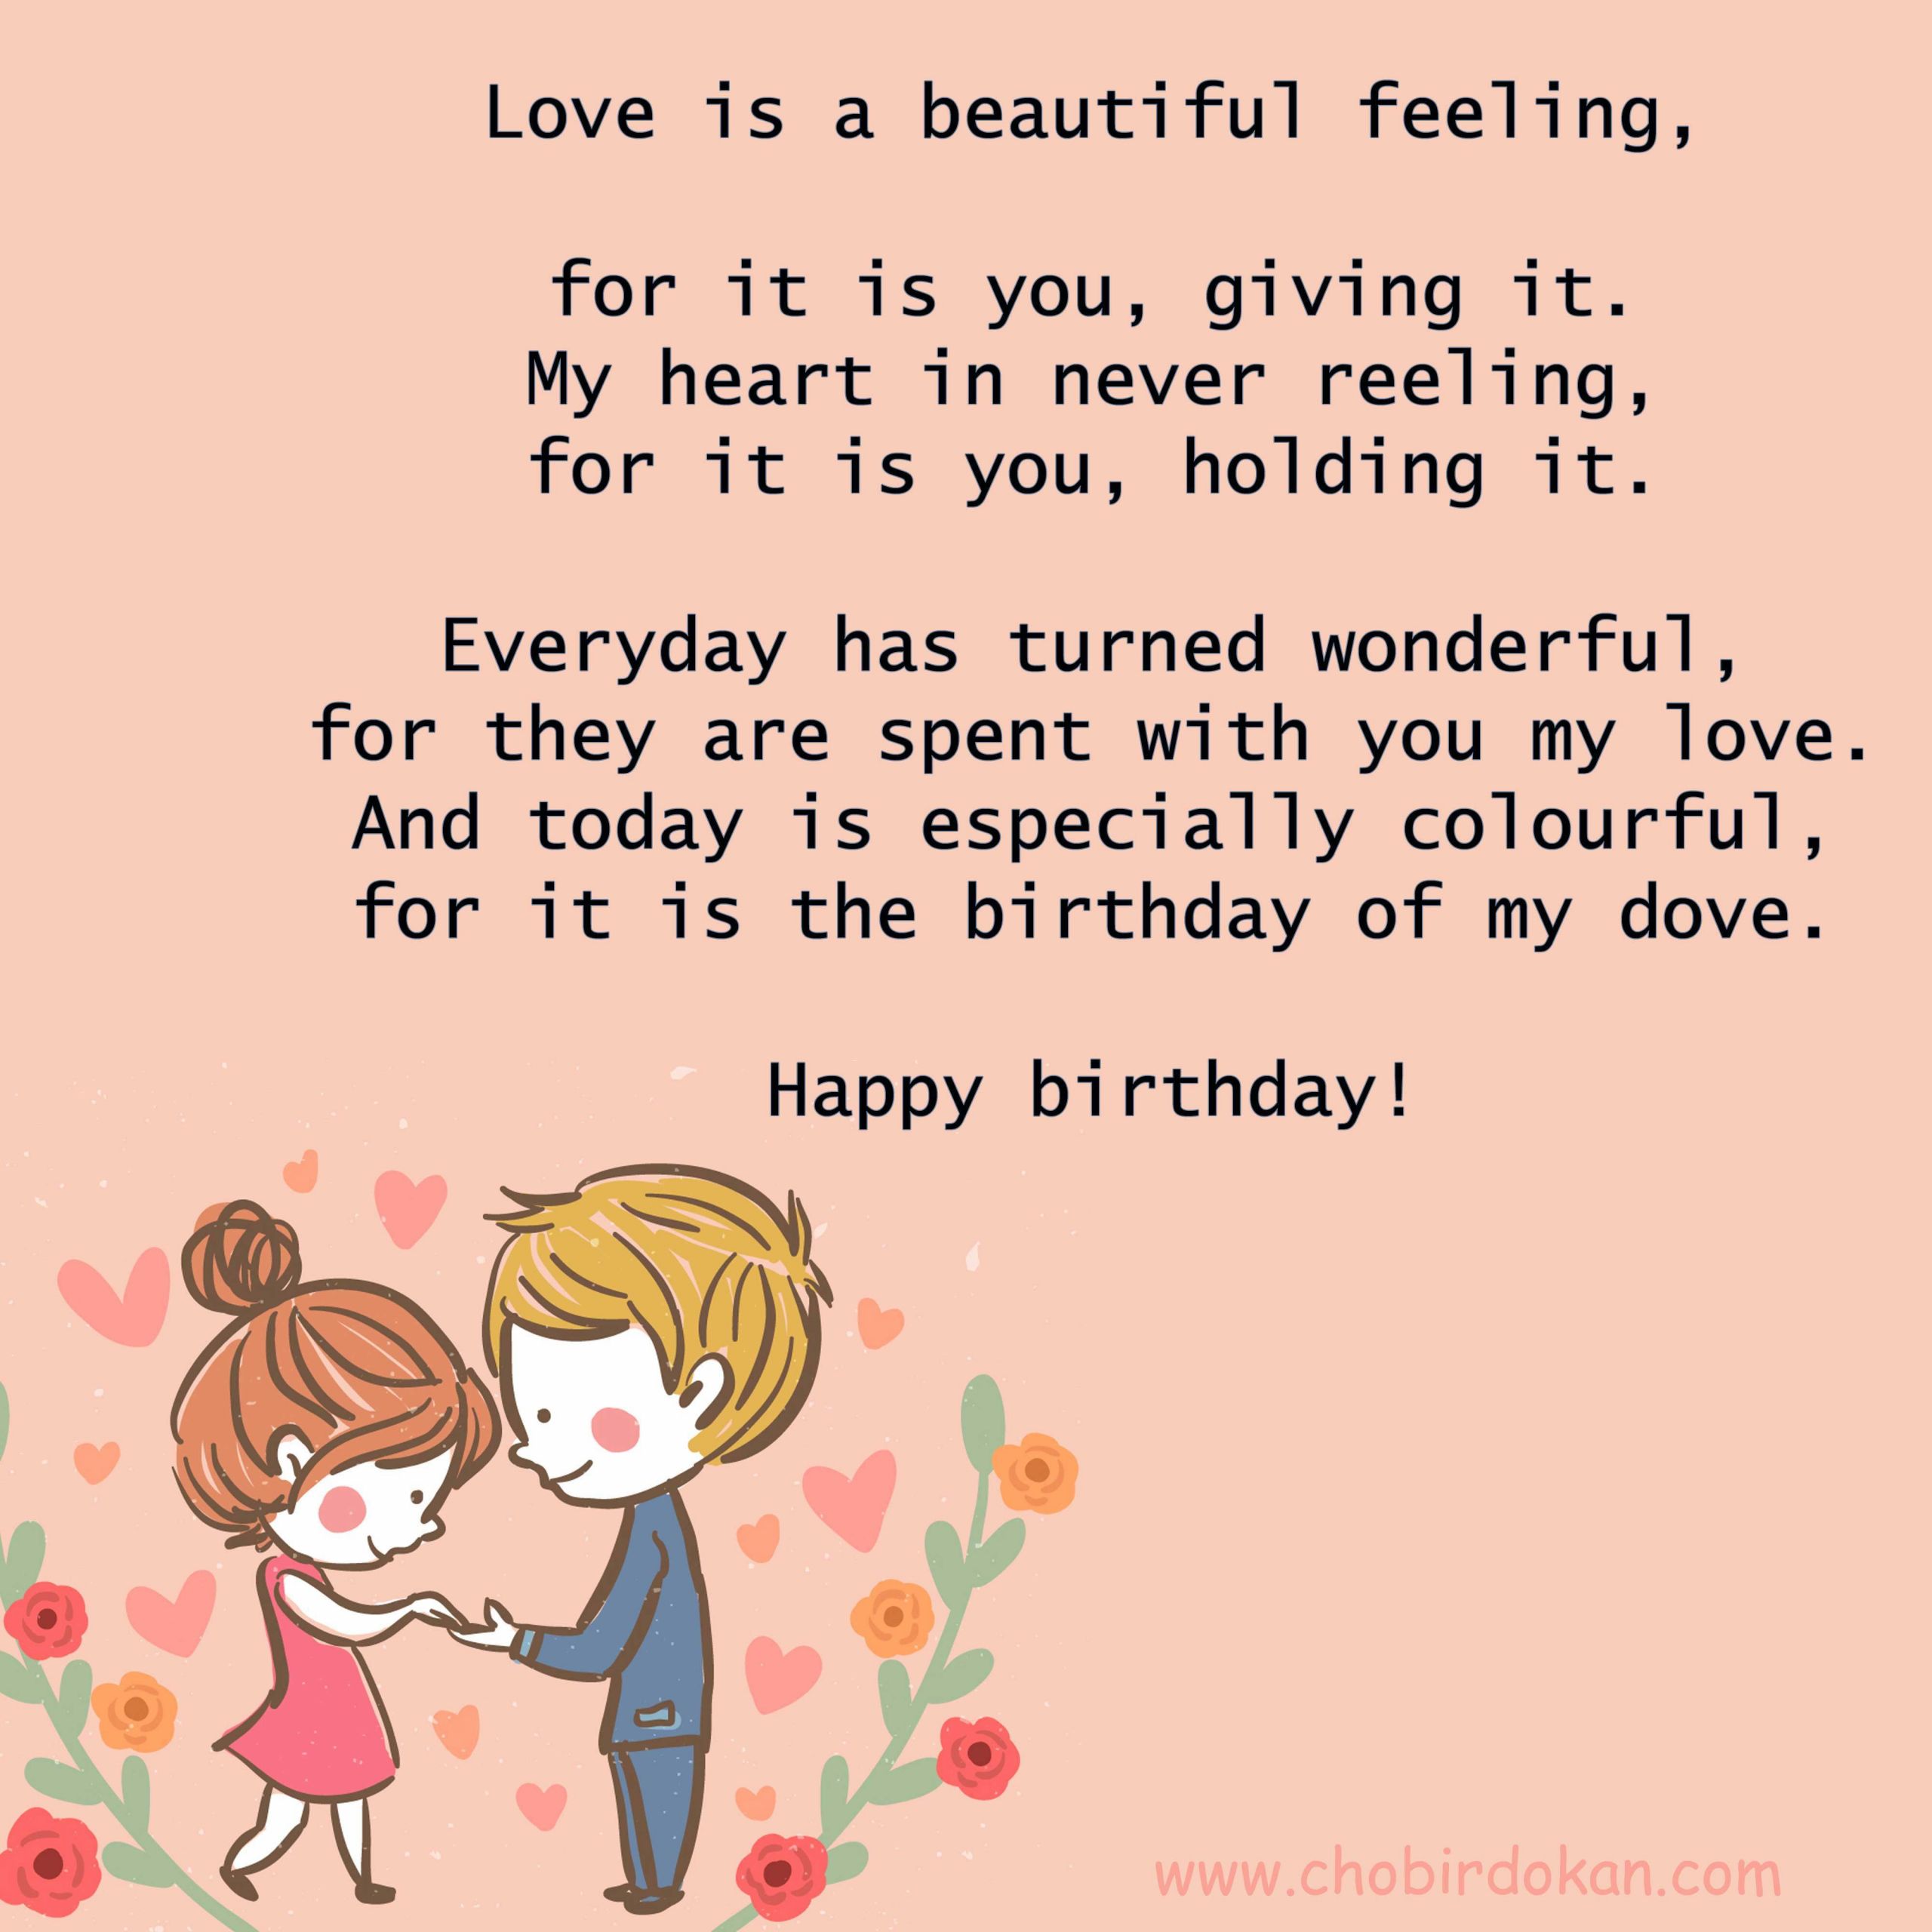 Funny Birthday Poems For Her
 Happy Birthday Poems For Him Cute Poetry for Boyfriend or